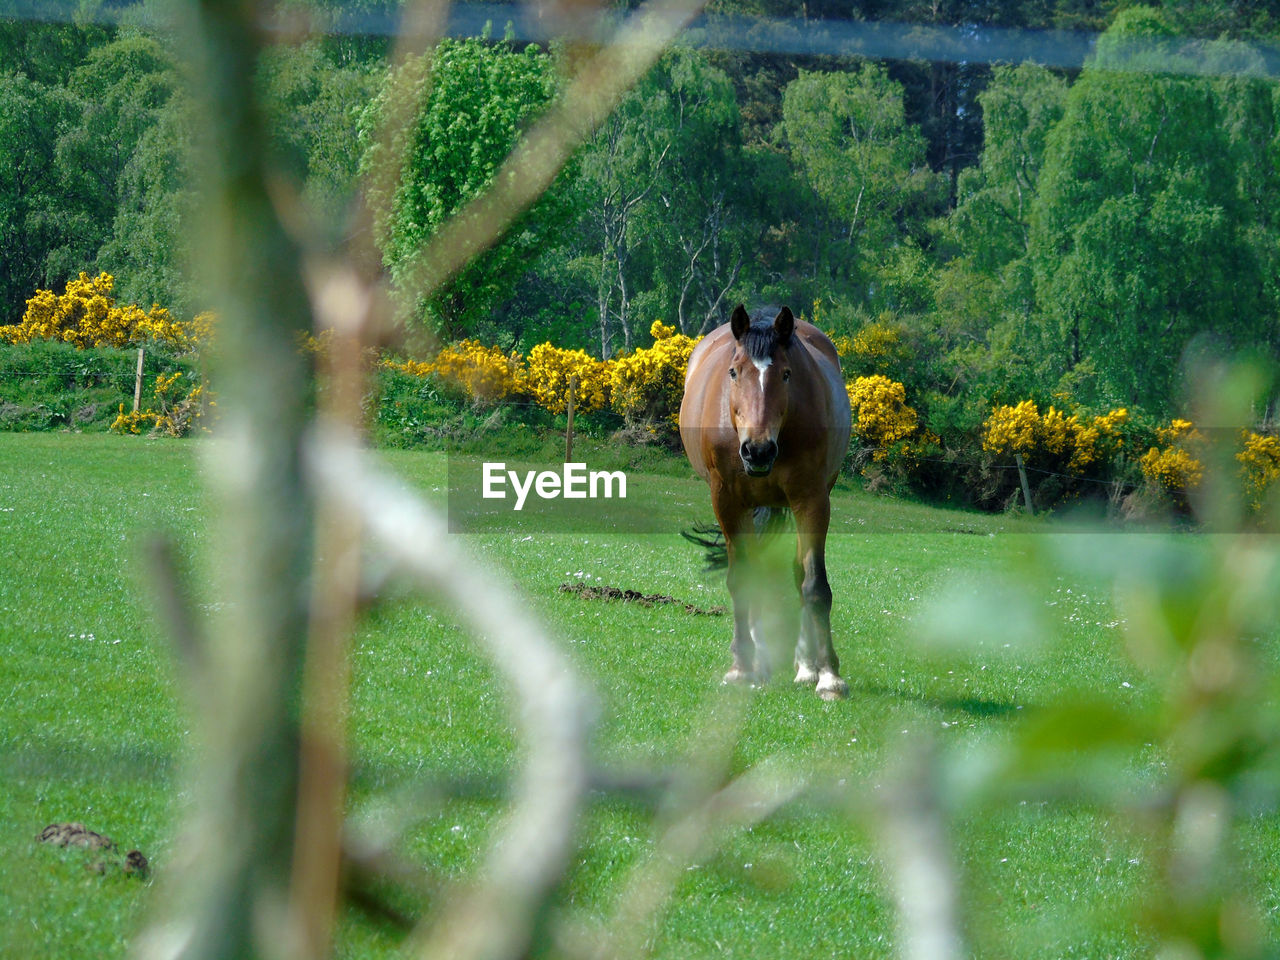 A view of a horse in a field through the fence